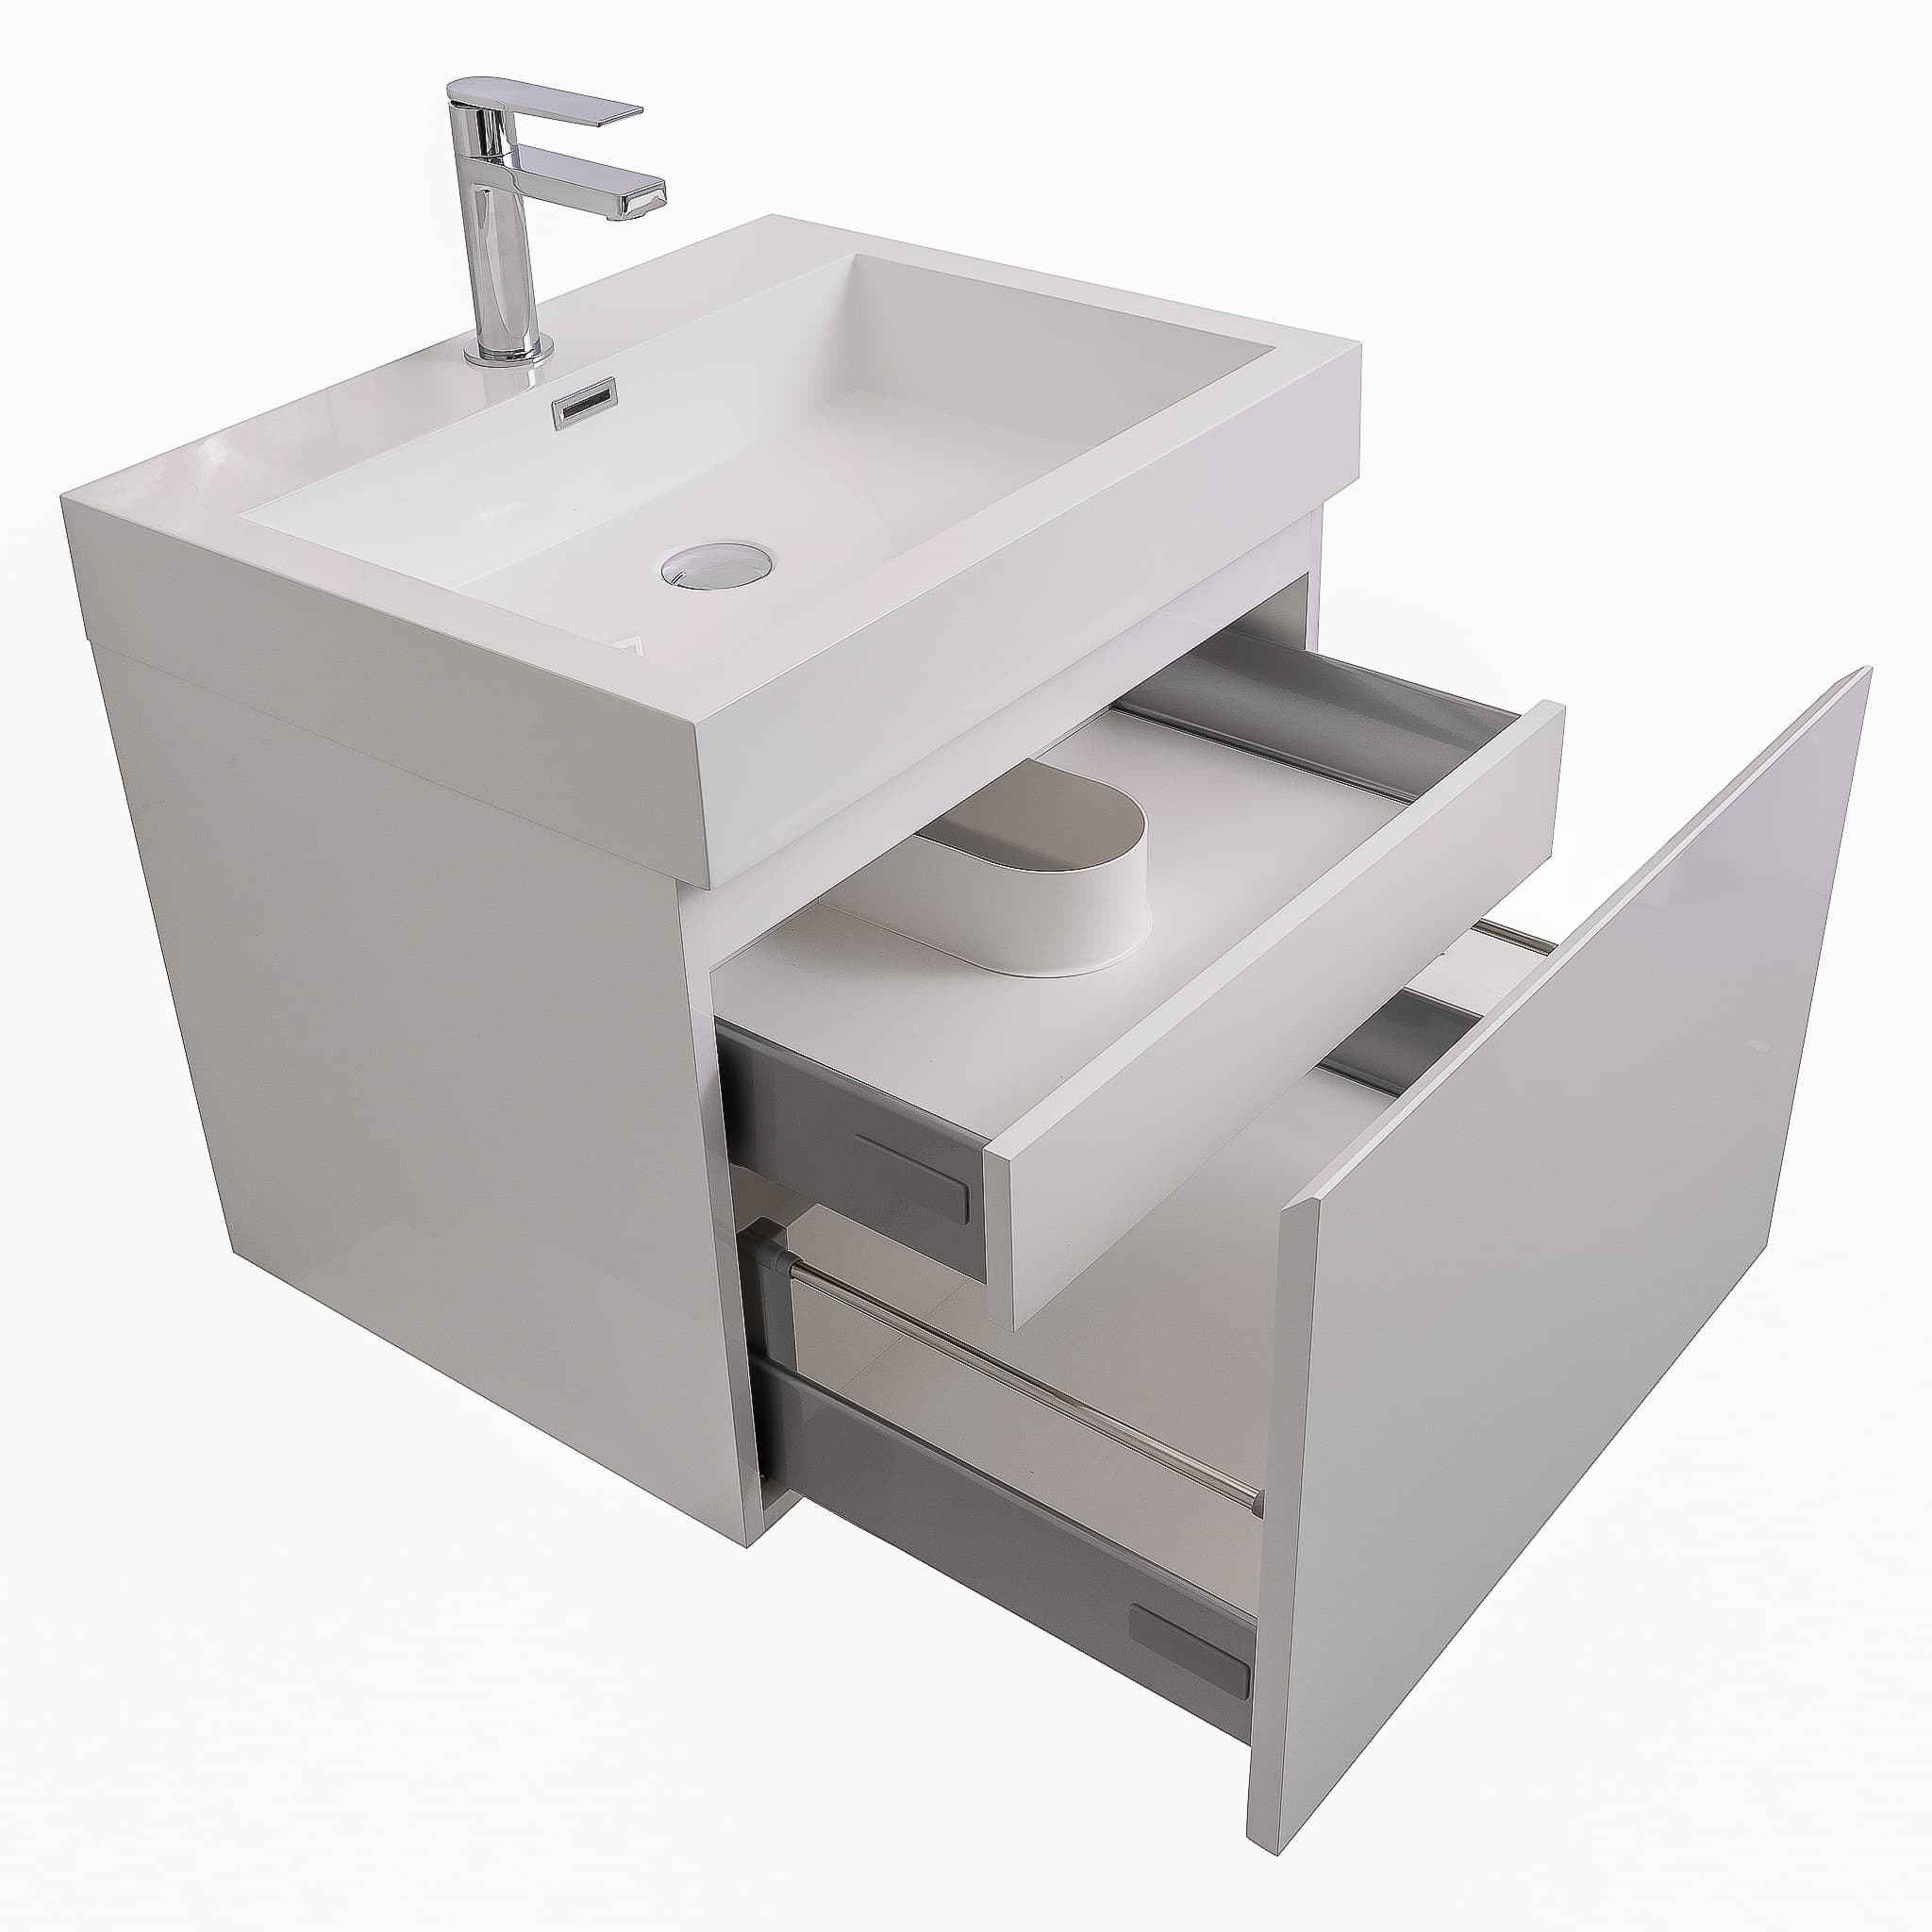 Aquamoon Venice 23.5" Square Sink White Wall Mounted Modern Bathroom Vanity Set. Mirror And Faucet Included.